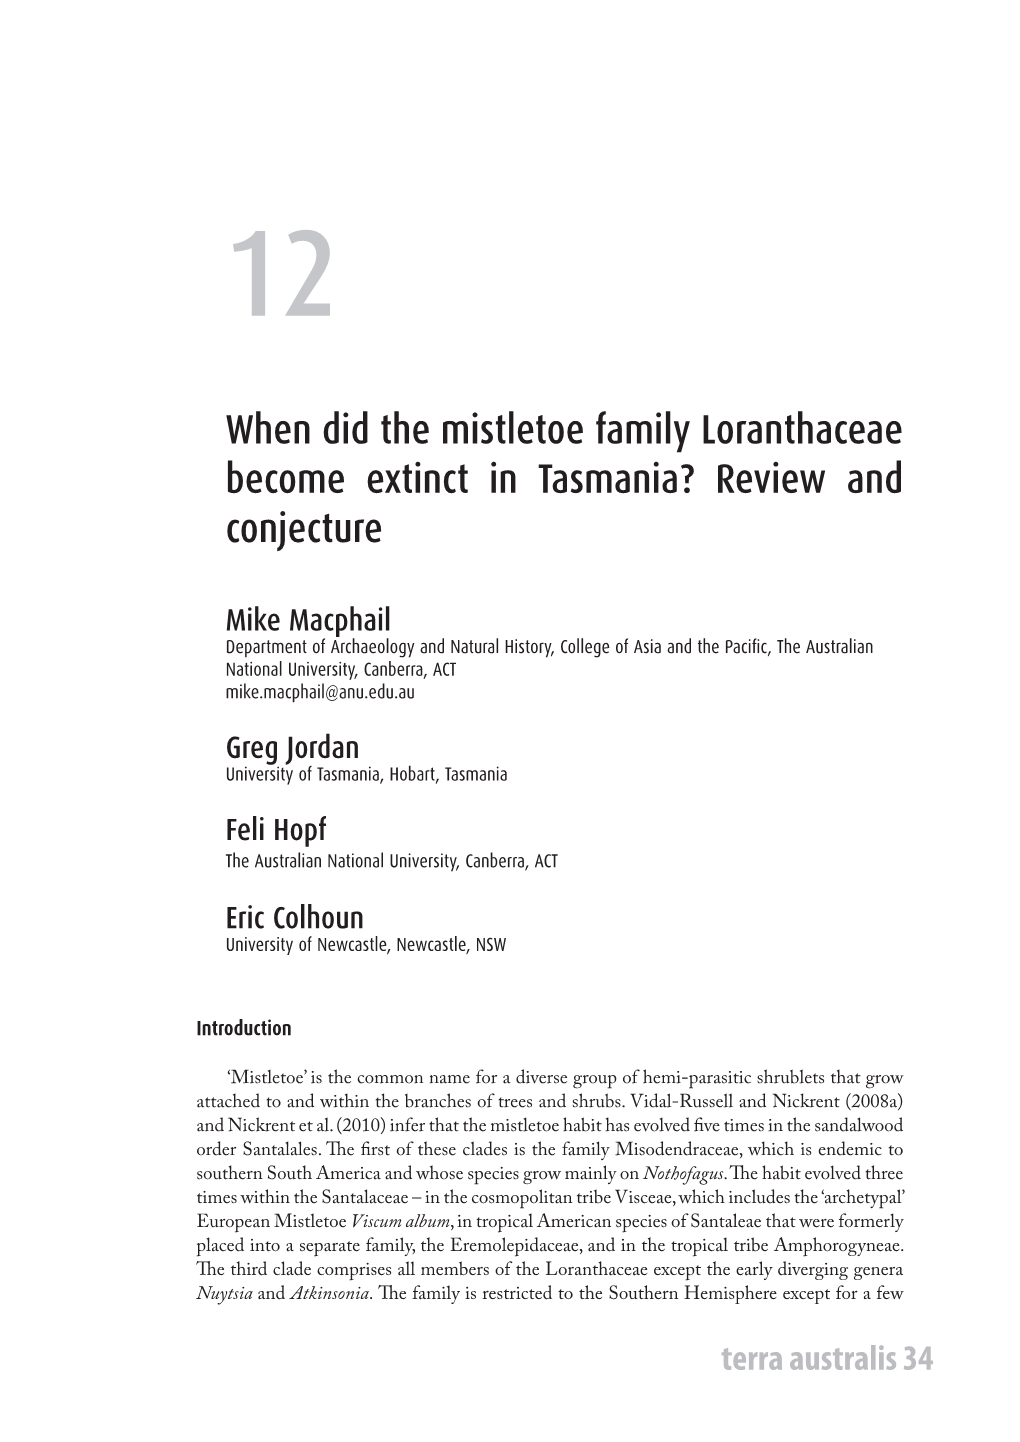 When Did the Mistletoe Family Loranthaceae Become Extinct in Tasmania? Review and Conjecture